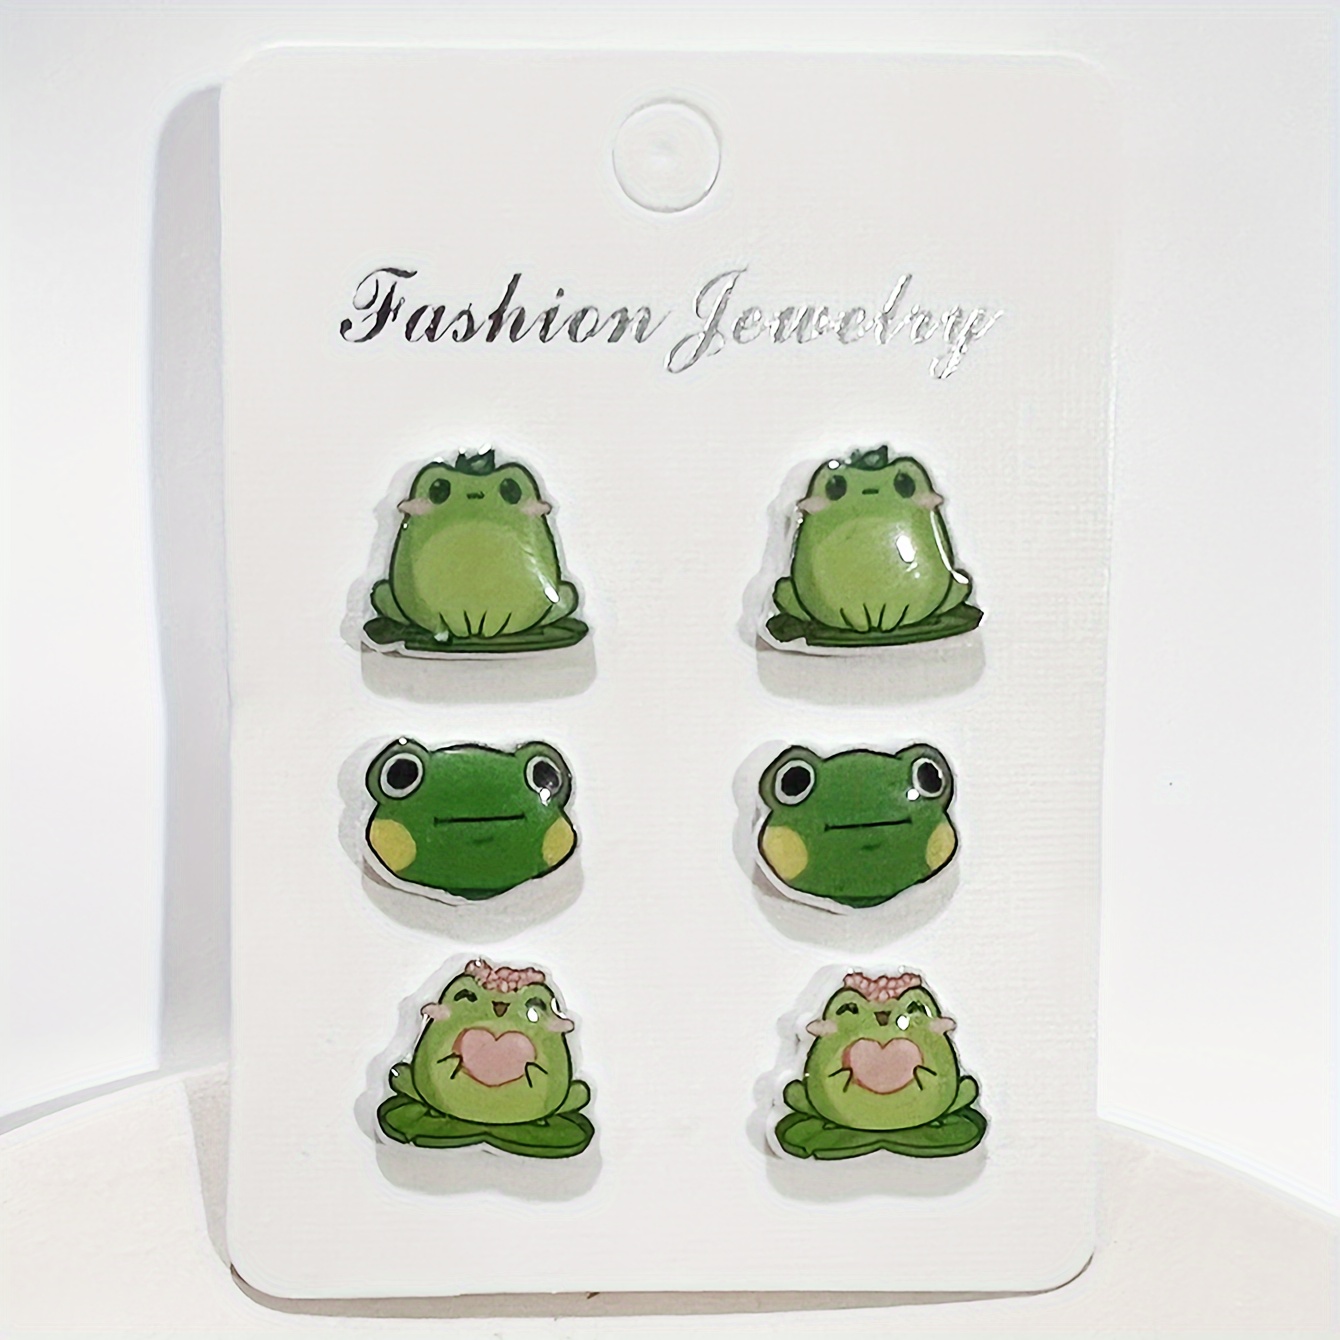 Cute Green Frog Earrings Charms Jewelry, Jewels Gift Birthday Gifts for Women Wife Girls Her 1 Pair, Free Returns & Free Ship, Plastic, 0.79